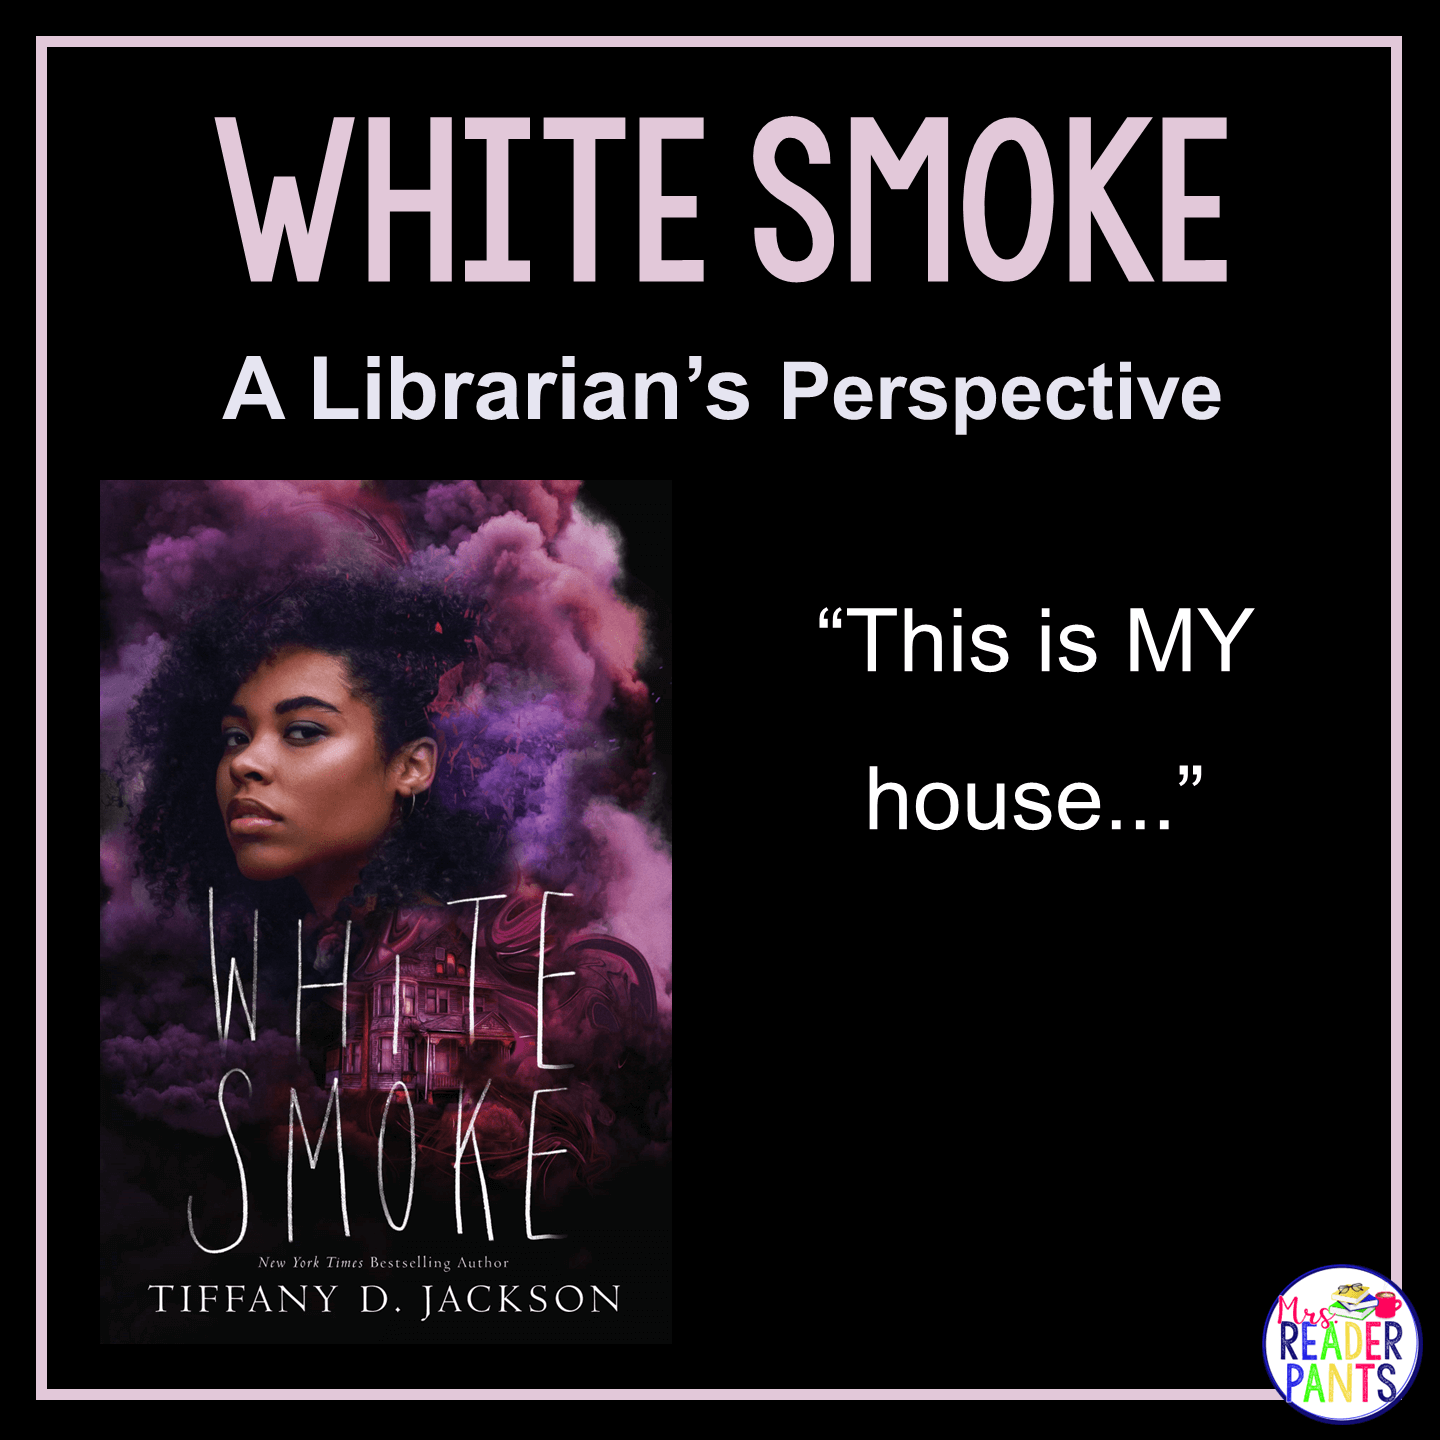 This is a Librarian's Perspective Review of White Smoke by Tiffany D. Jackson.